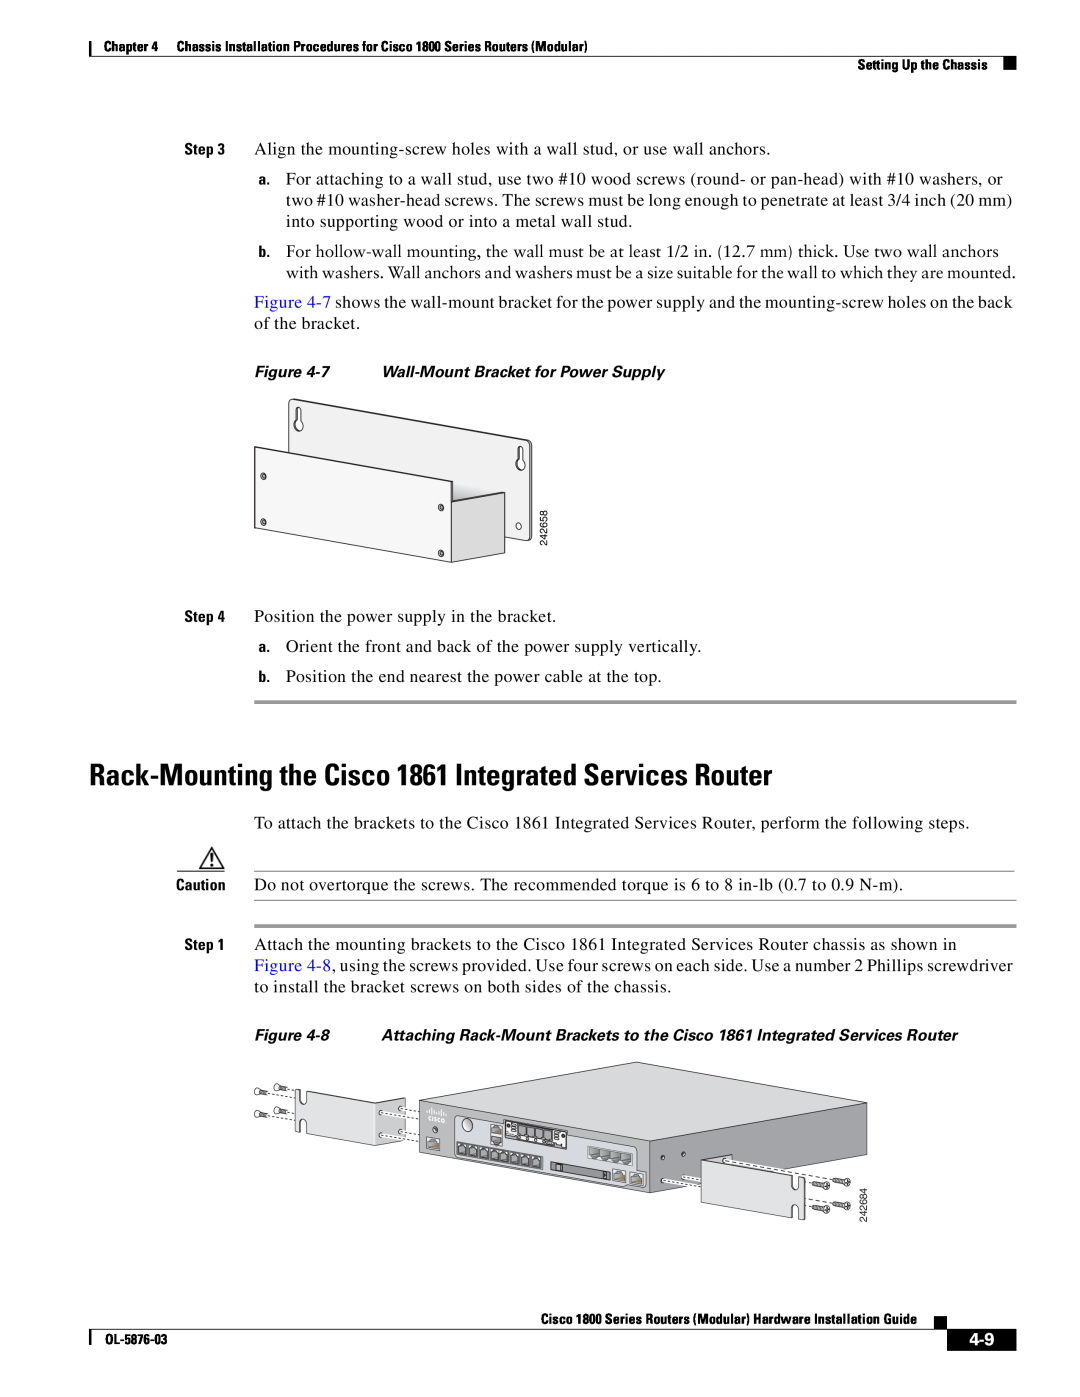 Cisco Systems CISCO1841-HSEC/K9-RF manual Rack-Mounting the Cisco 1861 Integrated Services Router 